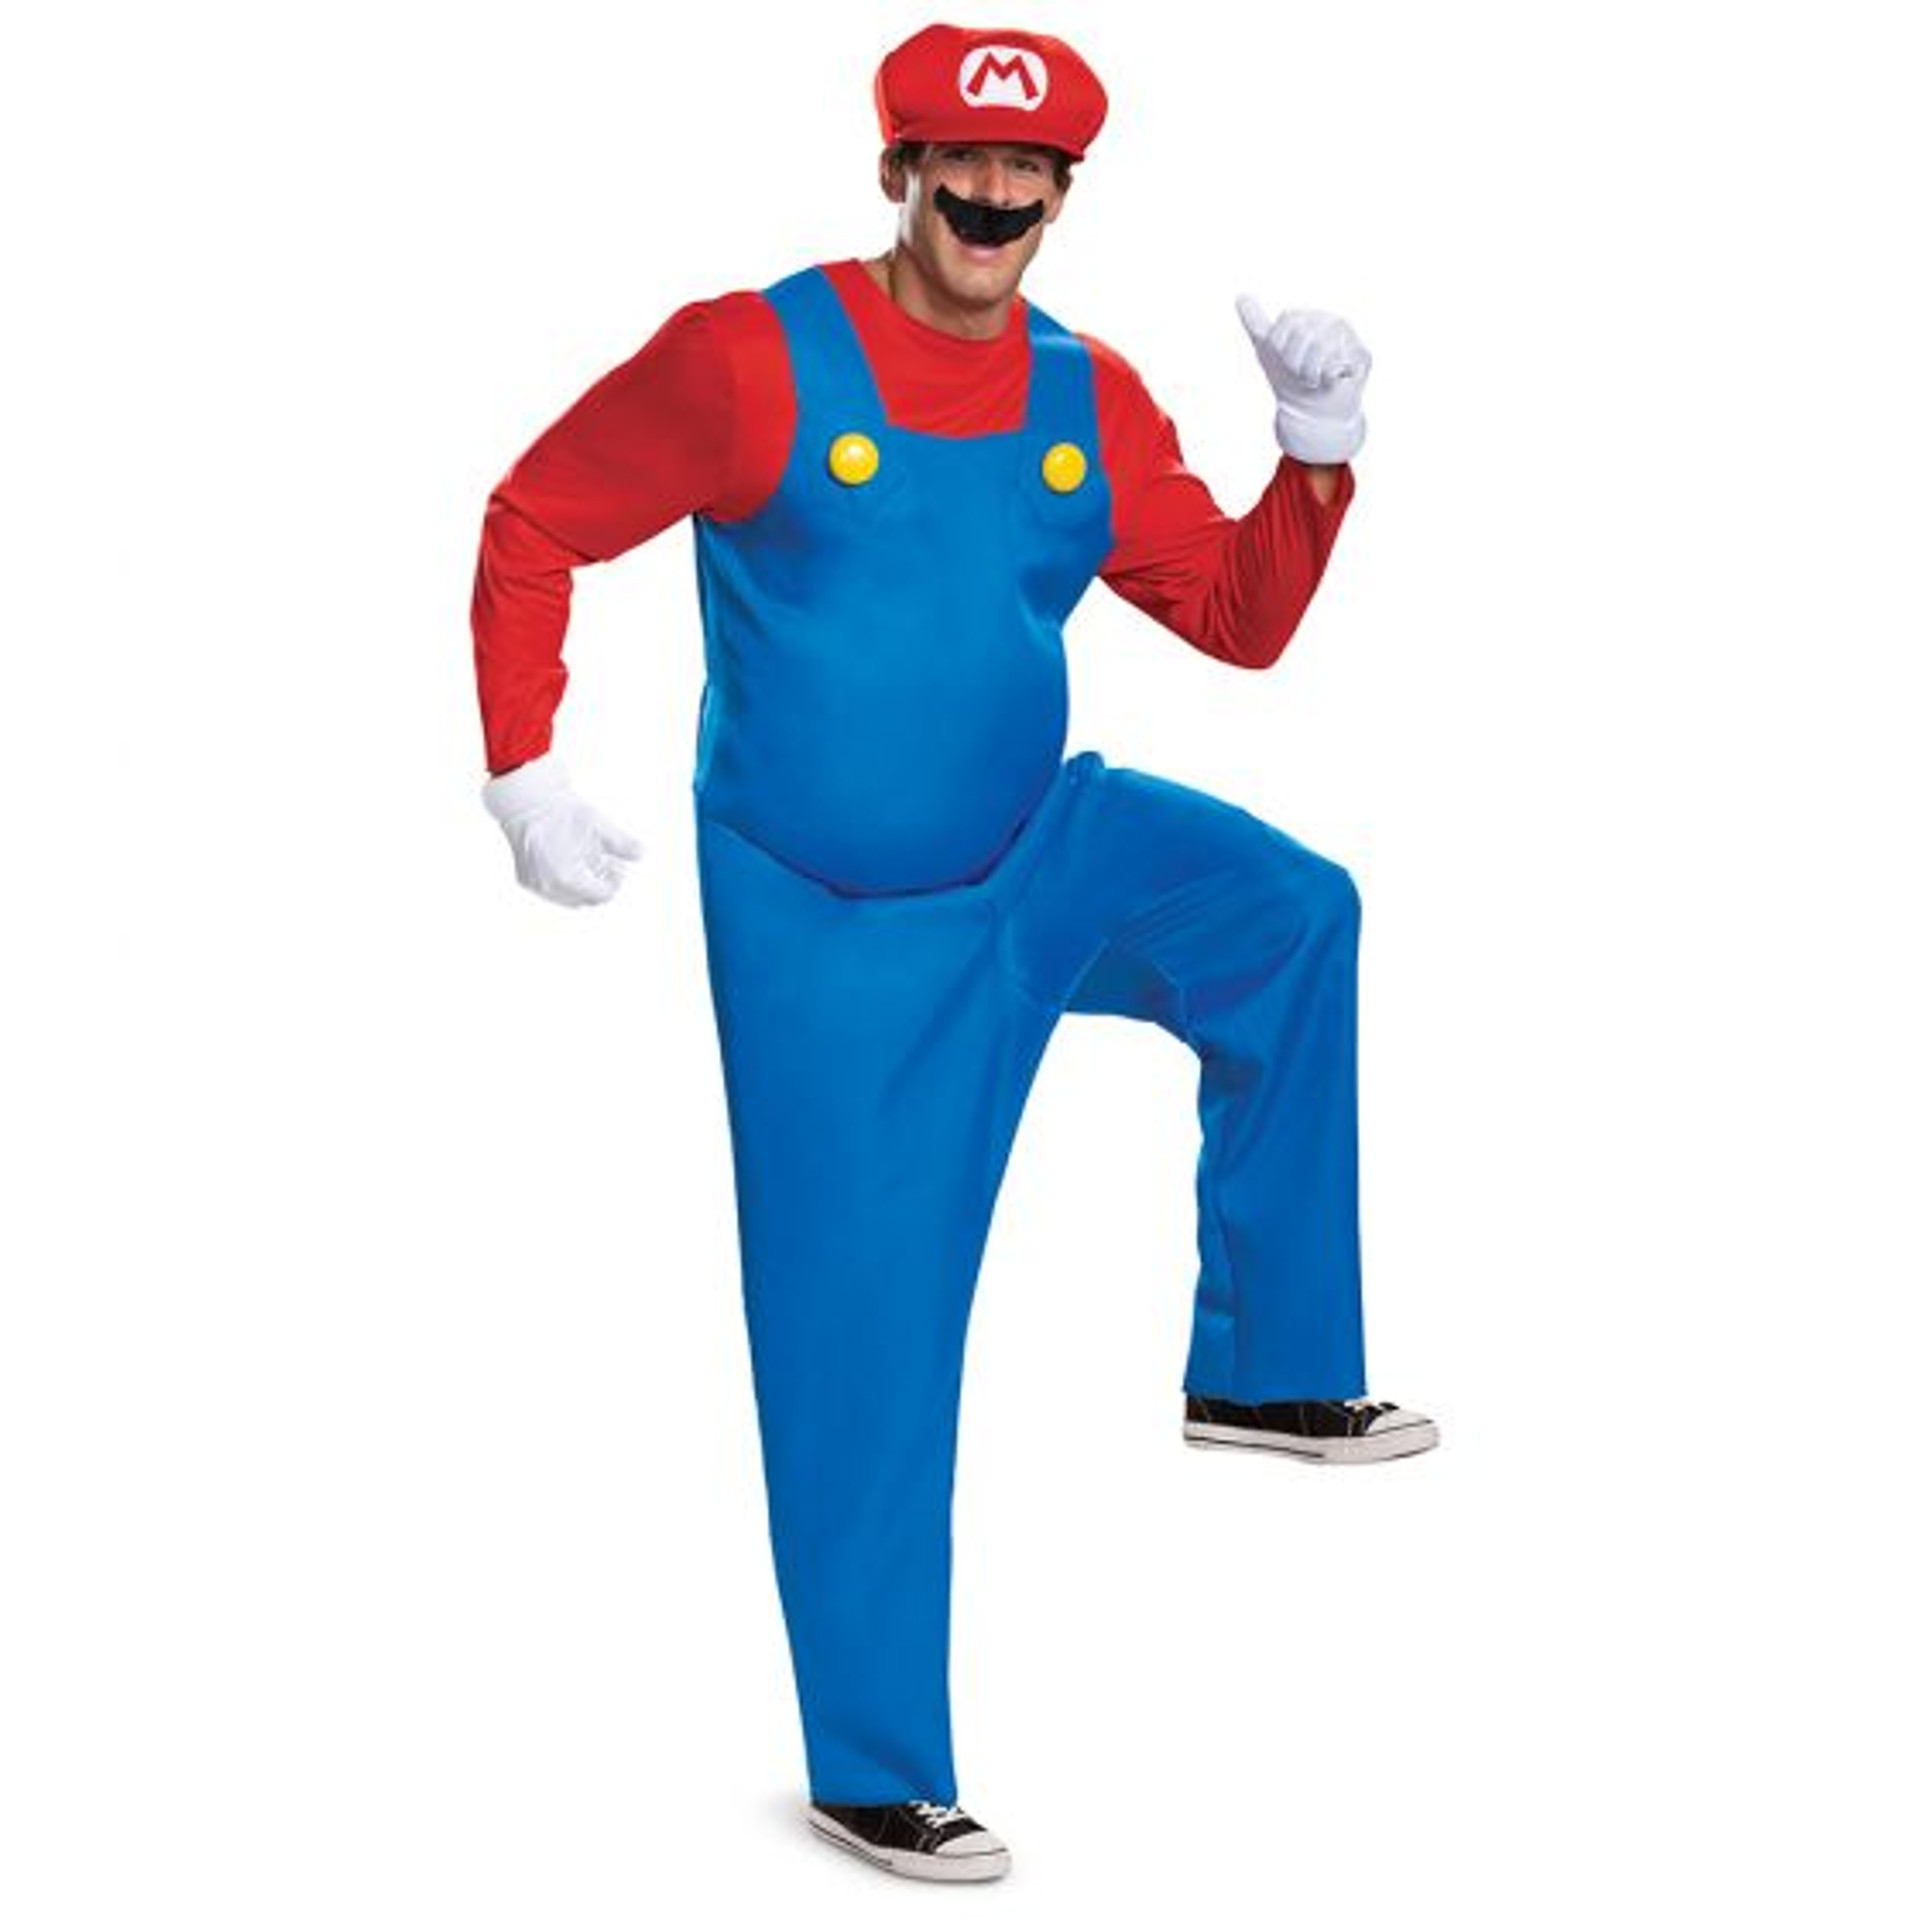 Deluxe Adult Bowser Super Mario Costume 6347